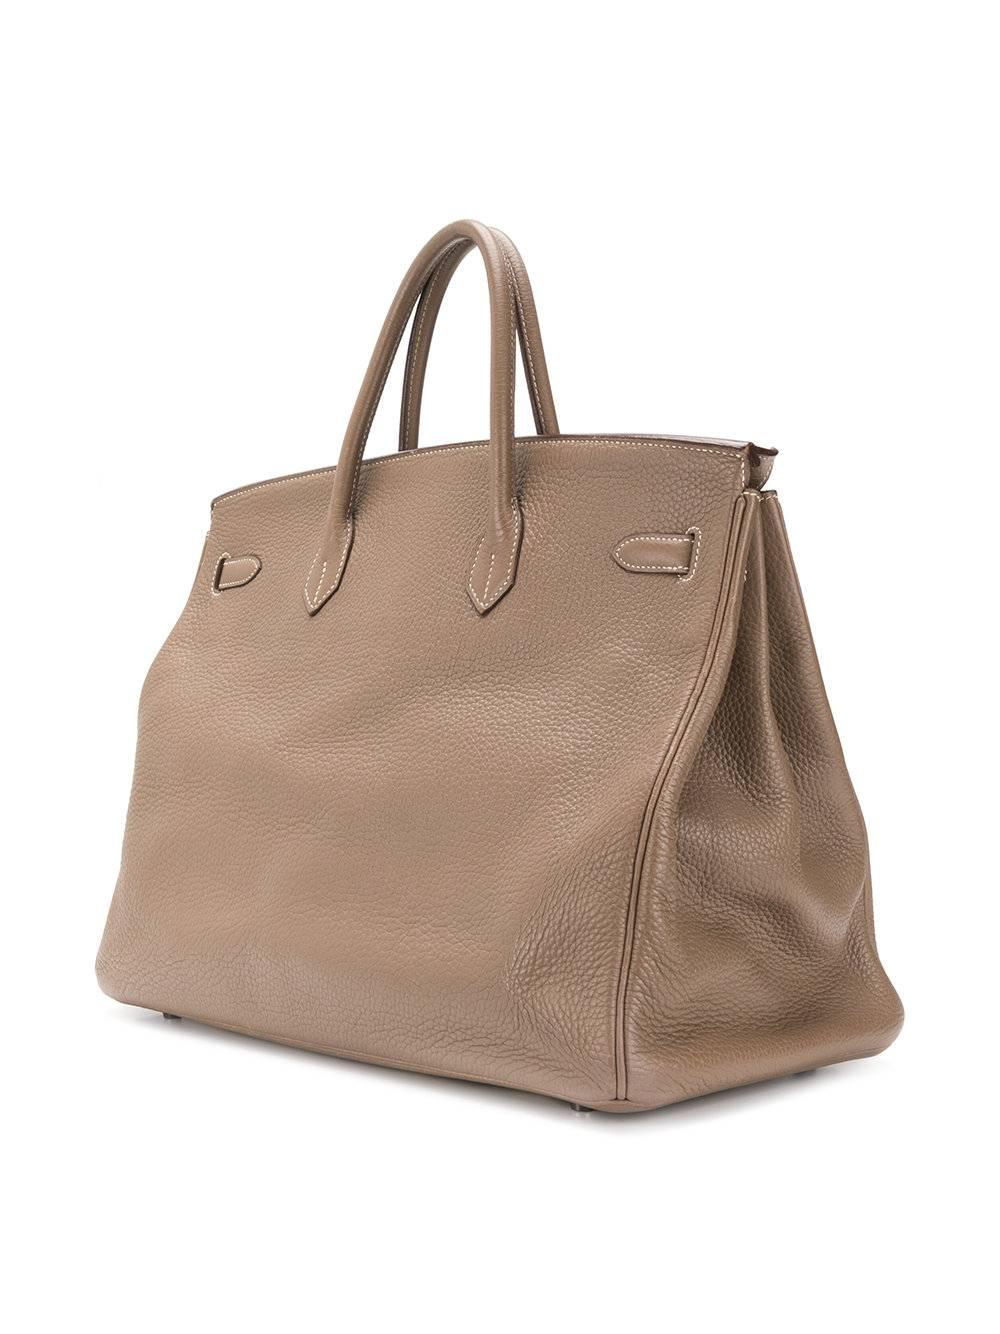 This classic Birkin 40, was fashioned from Etoupe leather and is perfect for everyday use. This spacious bag in its beige tone will compliment any outfit, it's smooth leather is soft to the touch but resistant. The bag features rounded top handles,